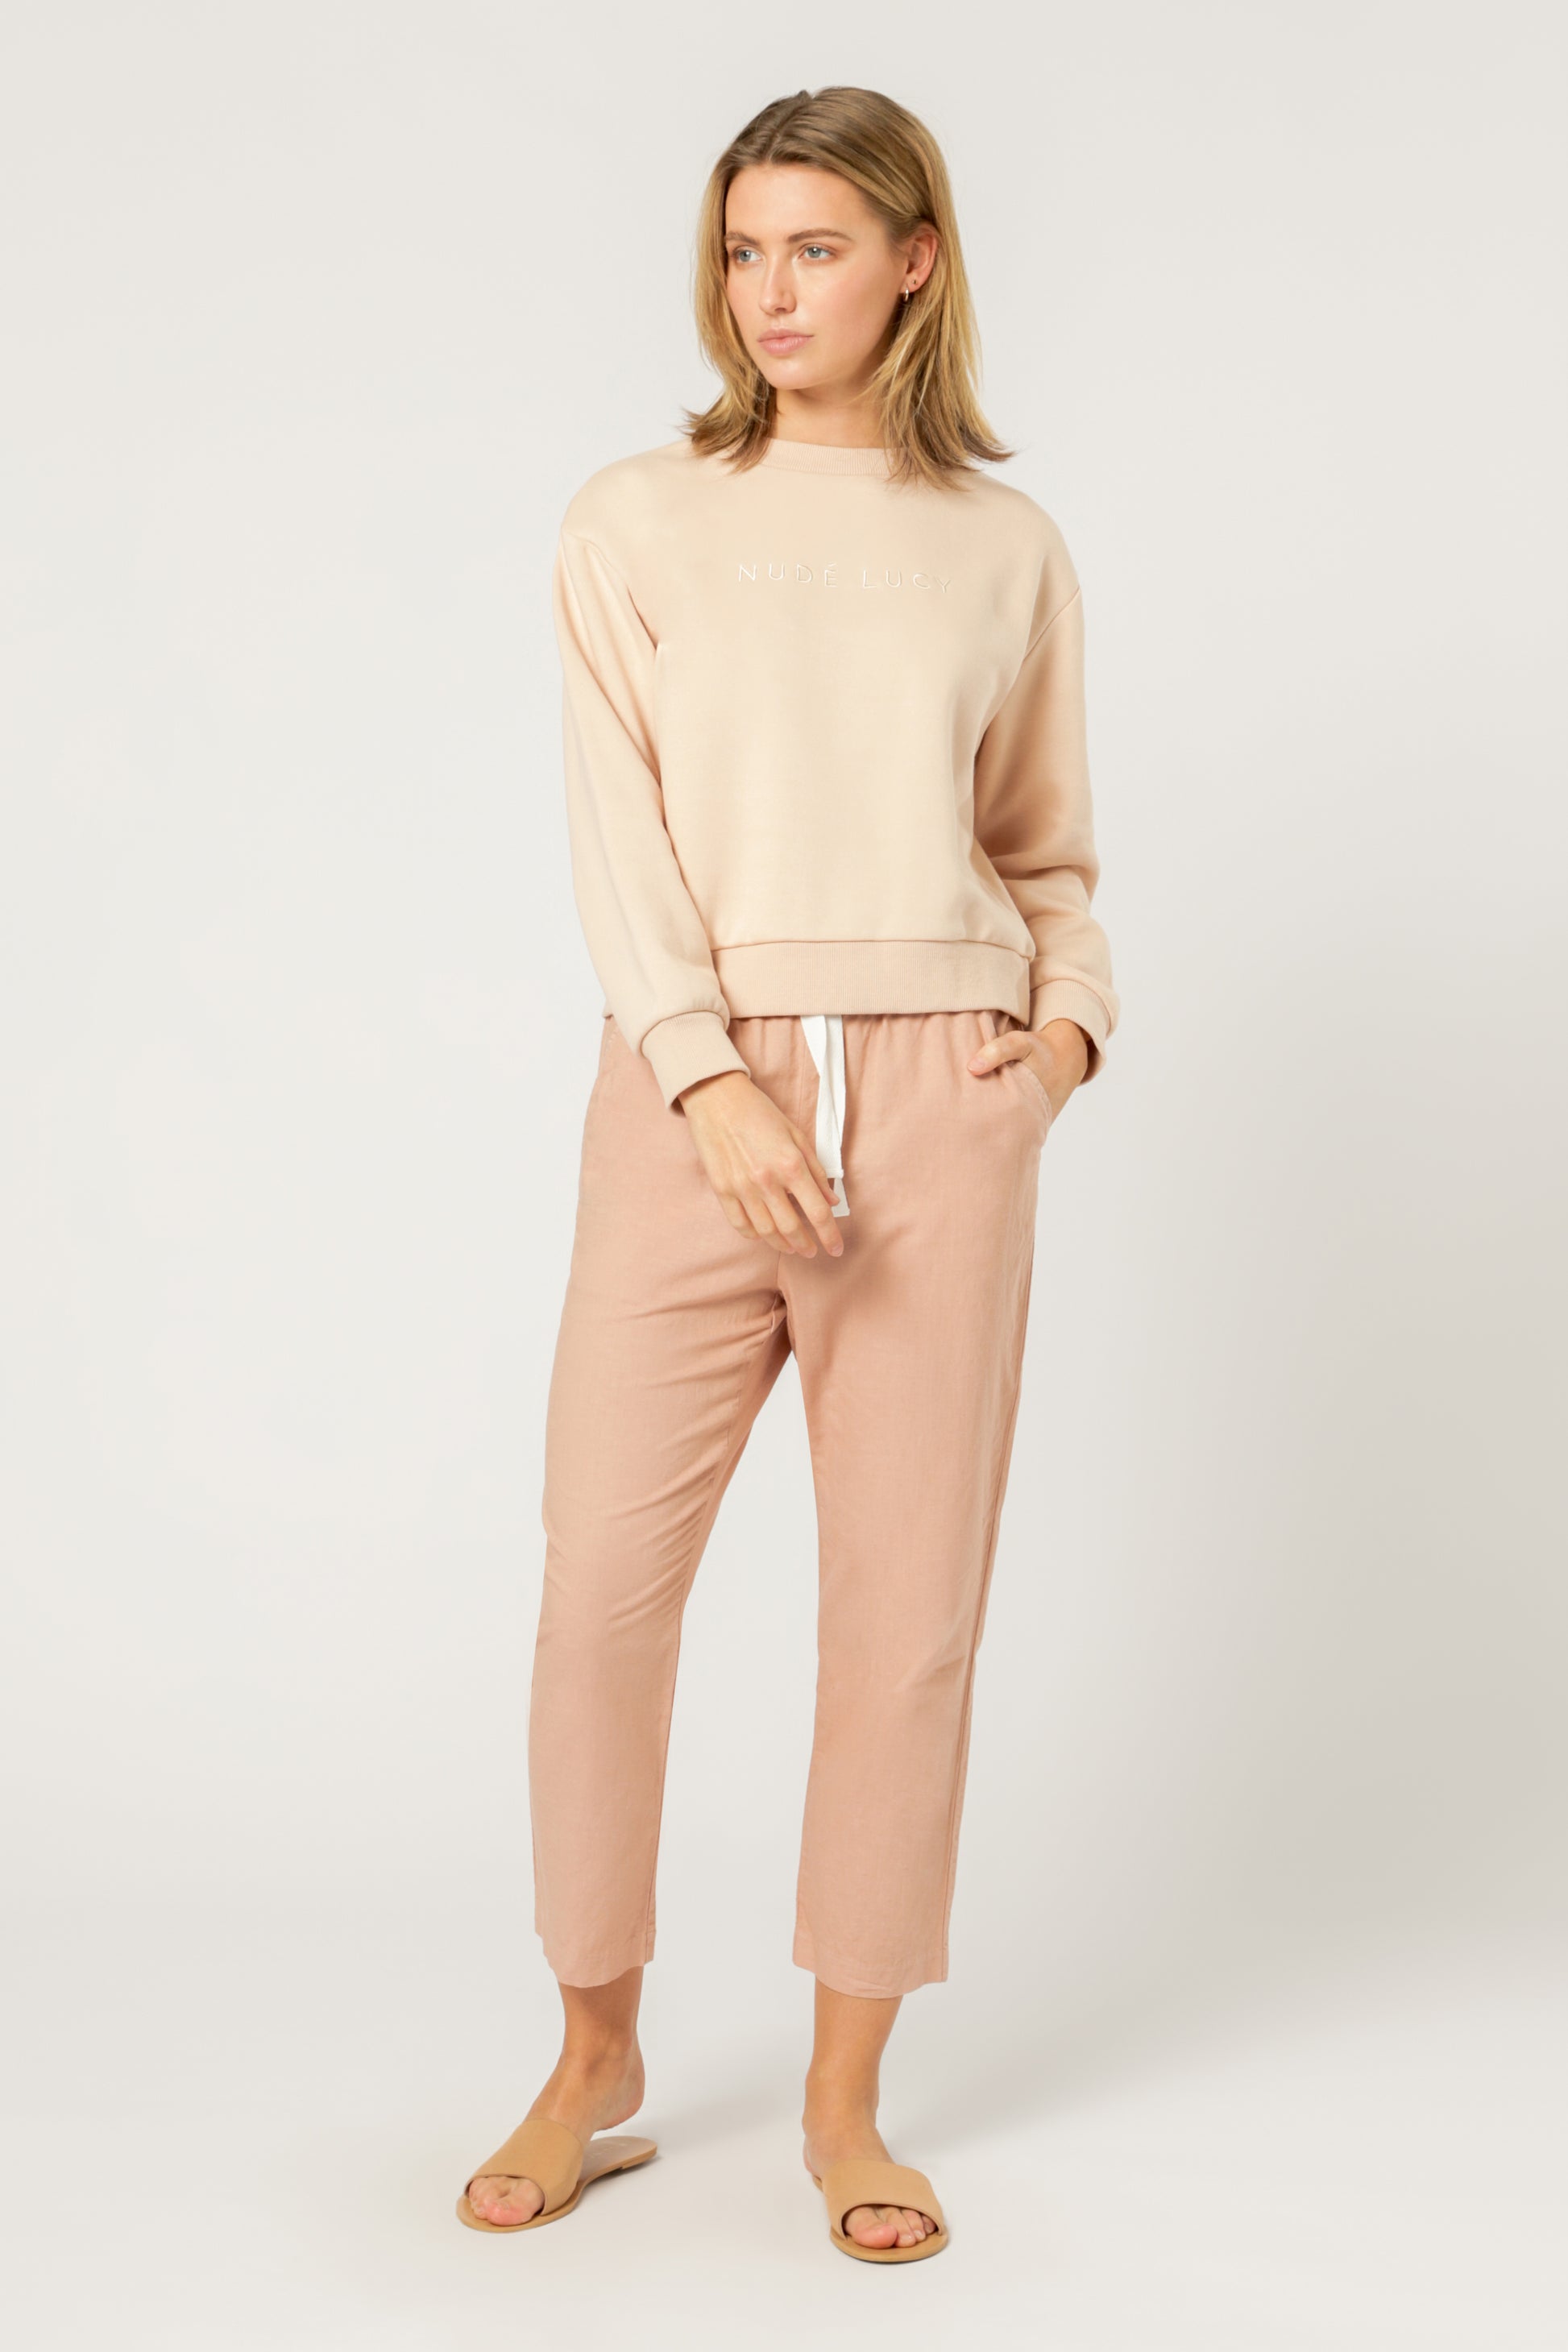 Nude Lucy Nude Lucy embr slogan sweat blush sweats